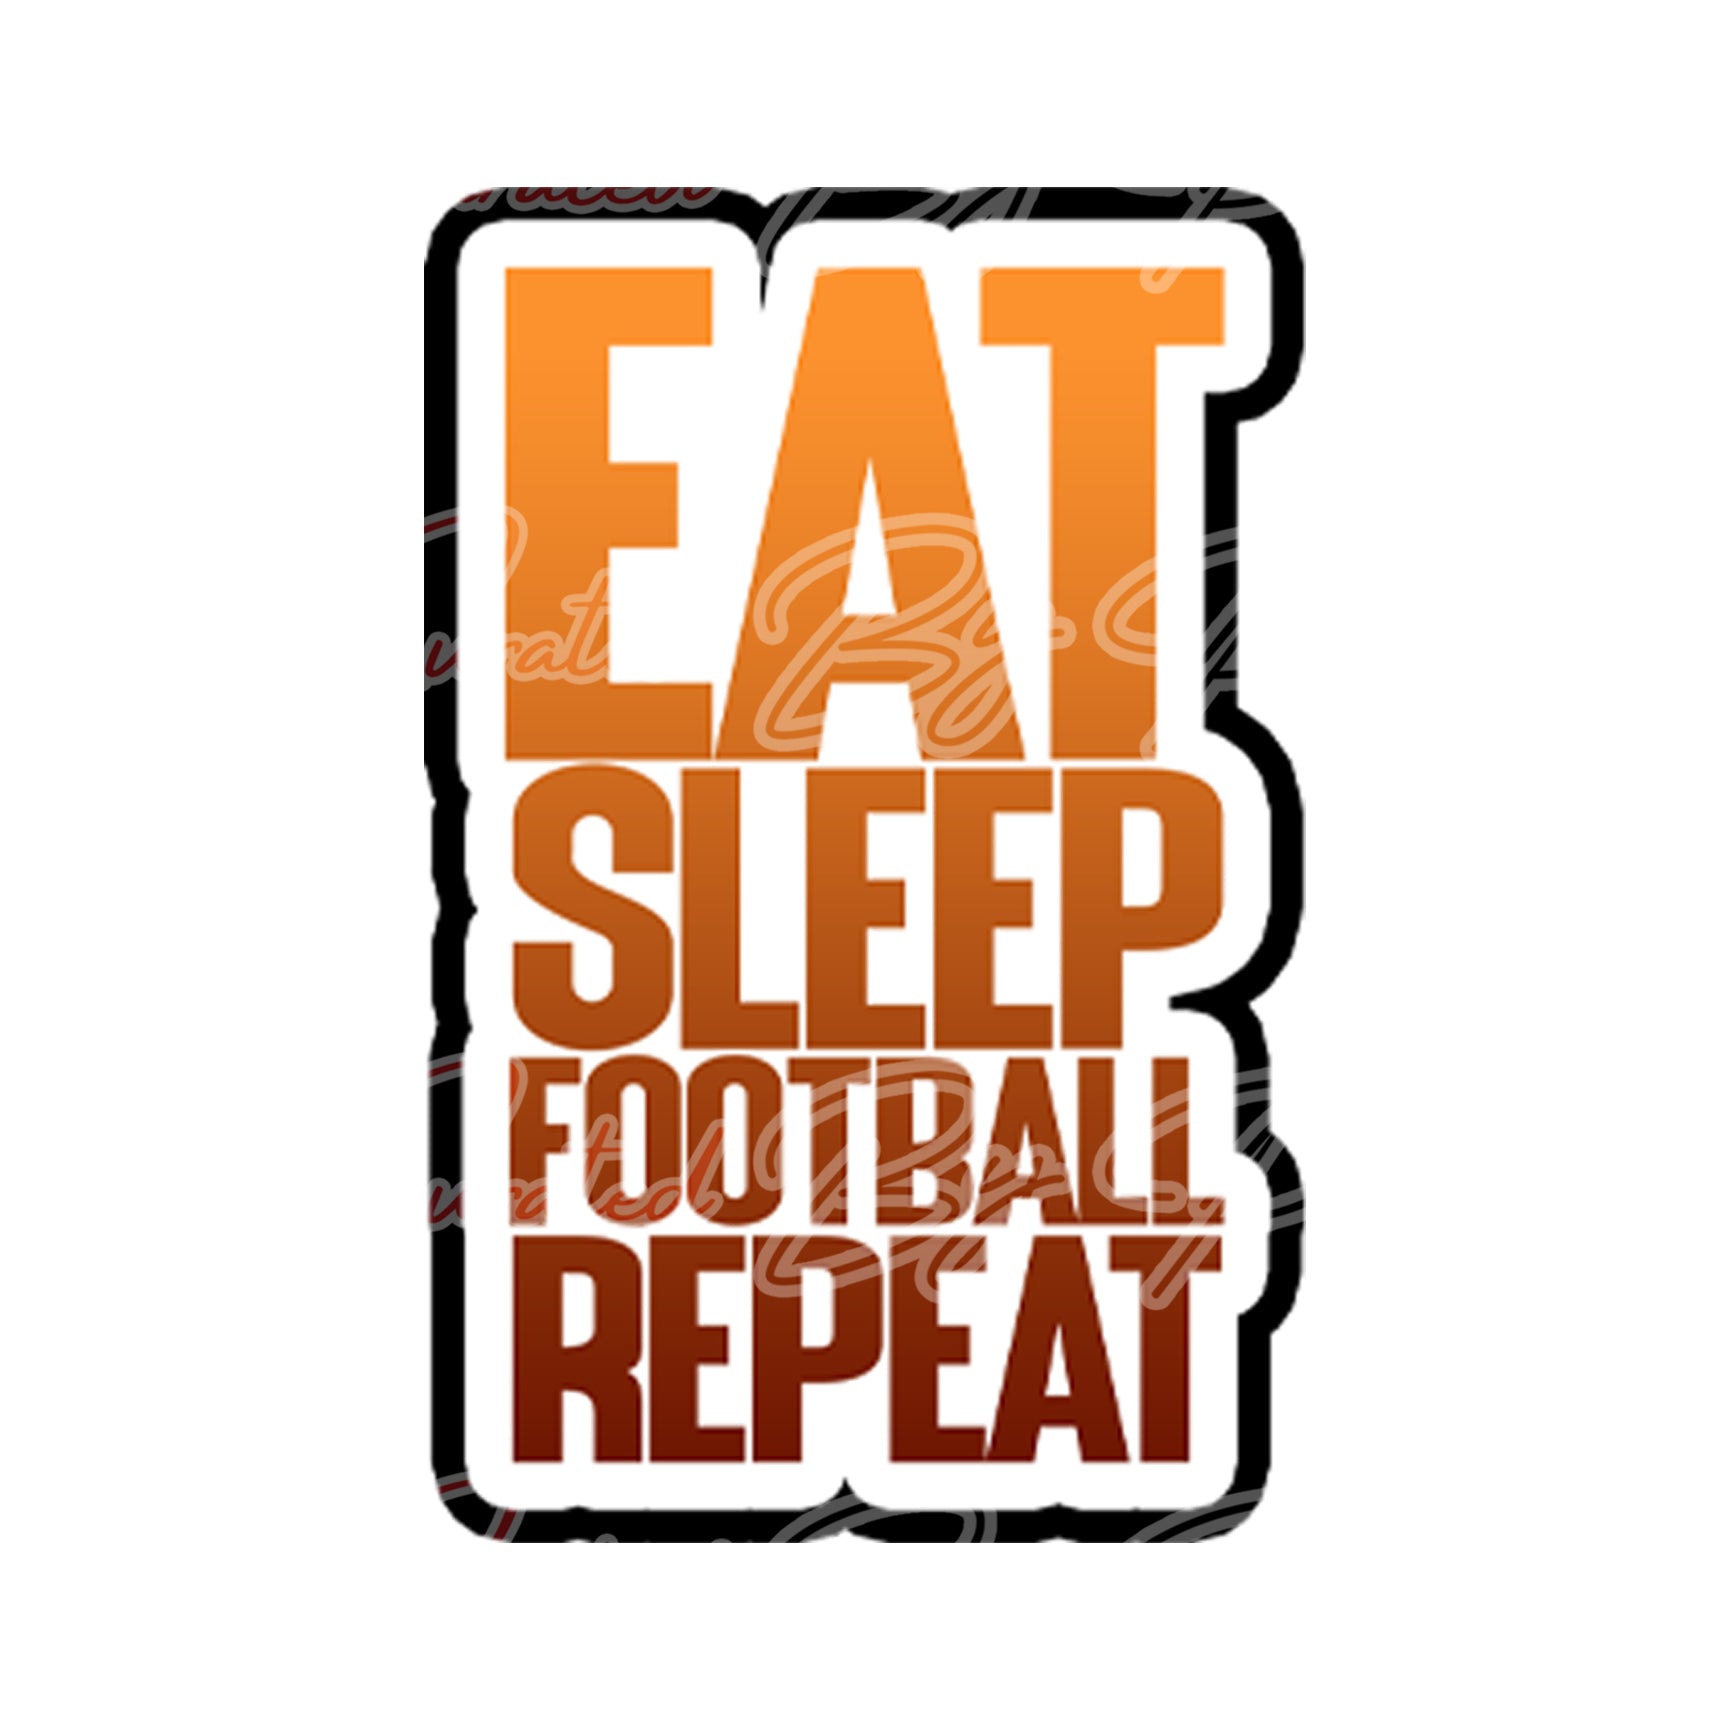 Eat Sleep Football Repeat prop-Thanksgiving day prop-thanksgiving day photo booth prop-photo booth props- props-photo booth props-custom props- custom prop signs-props -Curated by Phoenix